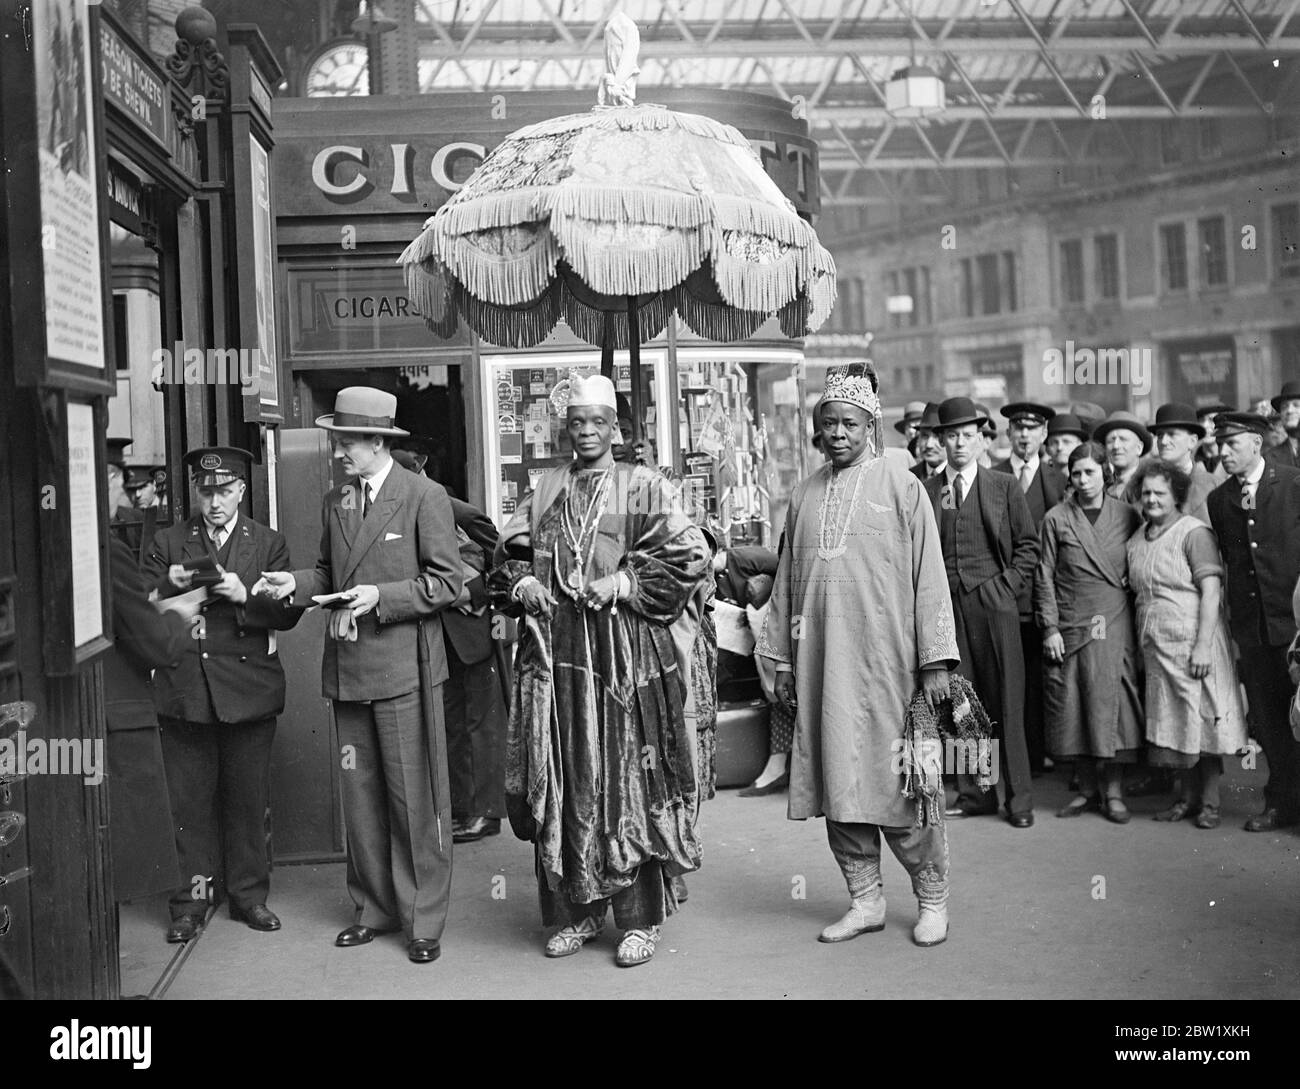 African ruler leaves thoughtfully to review under Royal umbrella. The Alake of Abeokuta, ruler of one of the largest tribes in Nigeria, left Waterloo station, London, to attend the fleet review at spit head. The Alake came to England to attend the Coronation, and is always sheltered by the Royal umbrella. Photo shows, the Alkake of Abeokuta under the Royal umbrella as he left Waterloo. 20 May 1937 Stock Photo